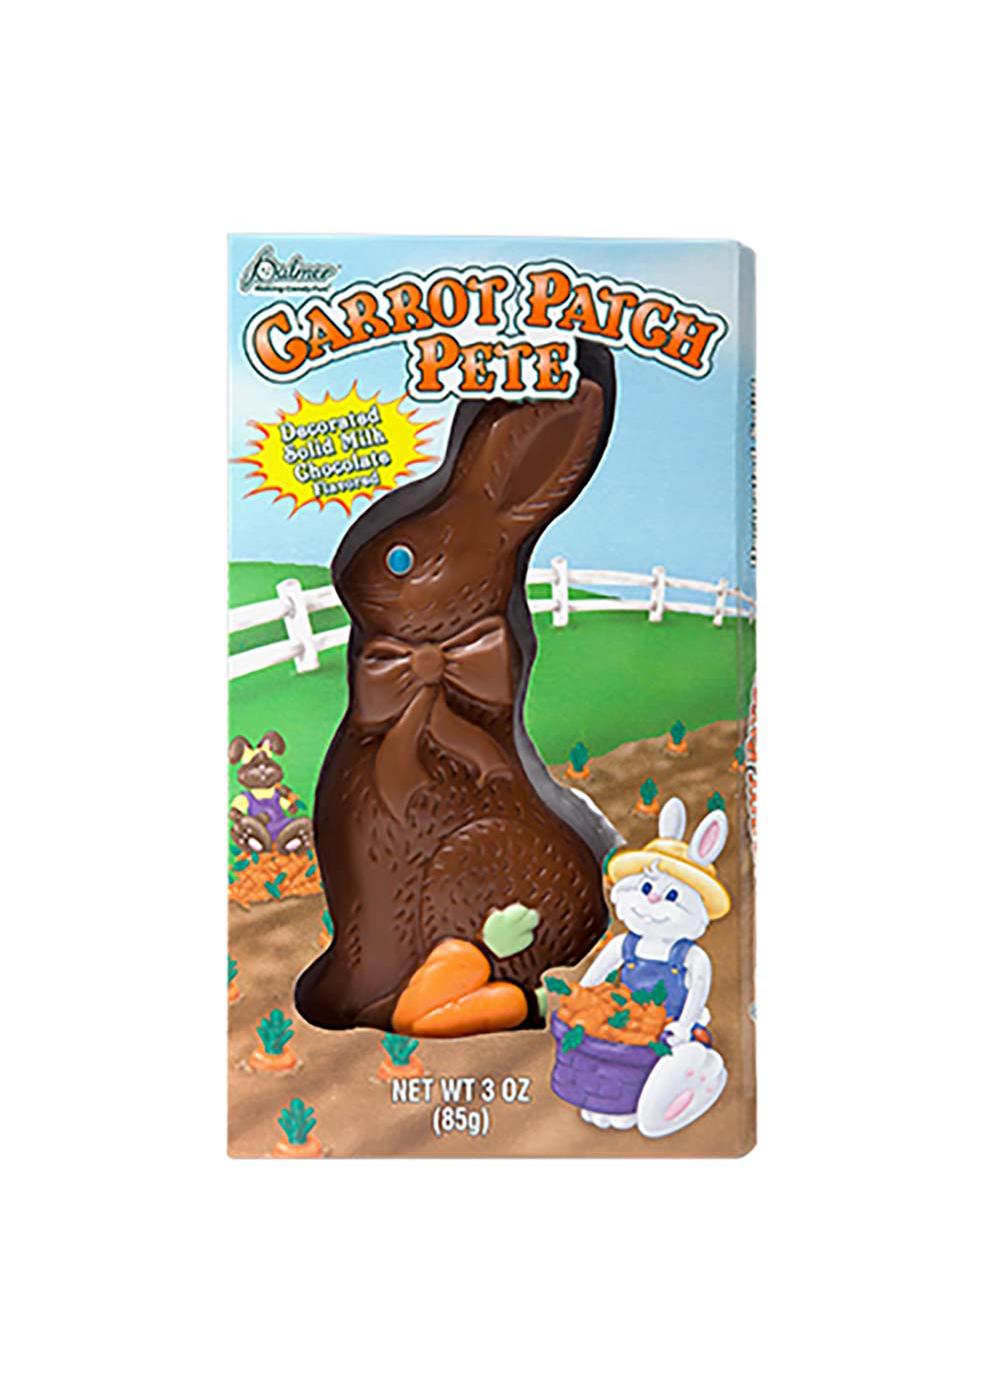 Palmer Carrot Patch Pete Solid Milk Chocolate Bunny Easter Candy; image 1 of 2